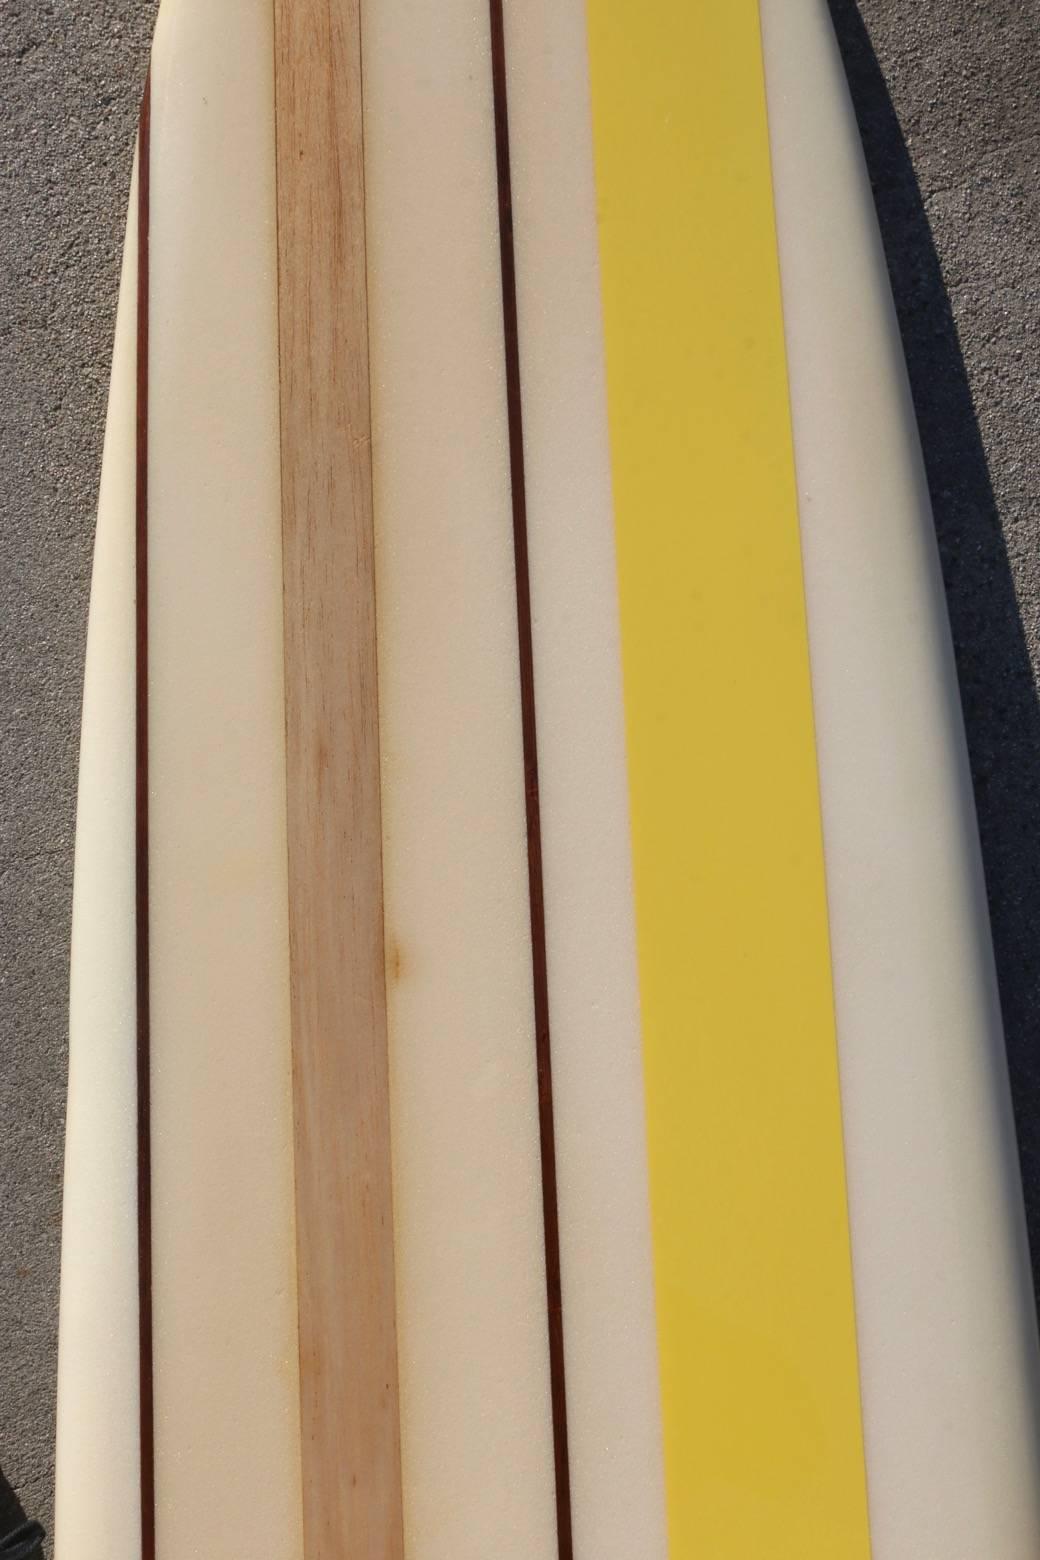 Fully Restored Early 1960s Surfboard by Aqua Divers, Lomita CA, Extremely Rare 1